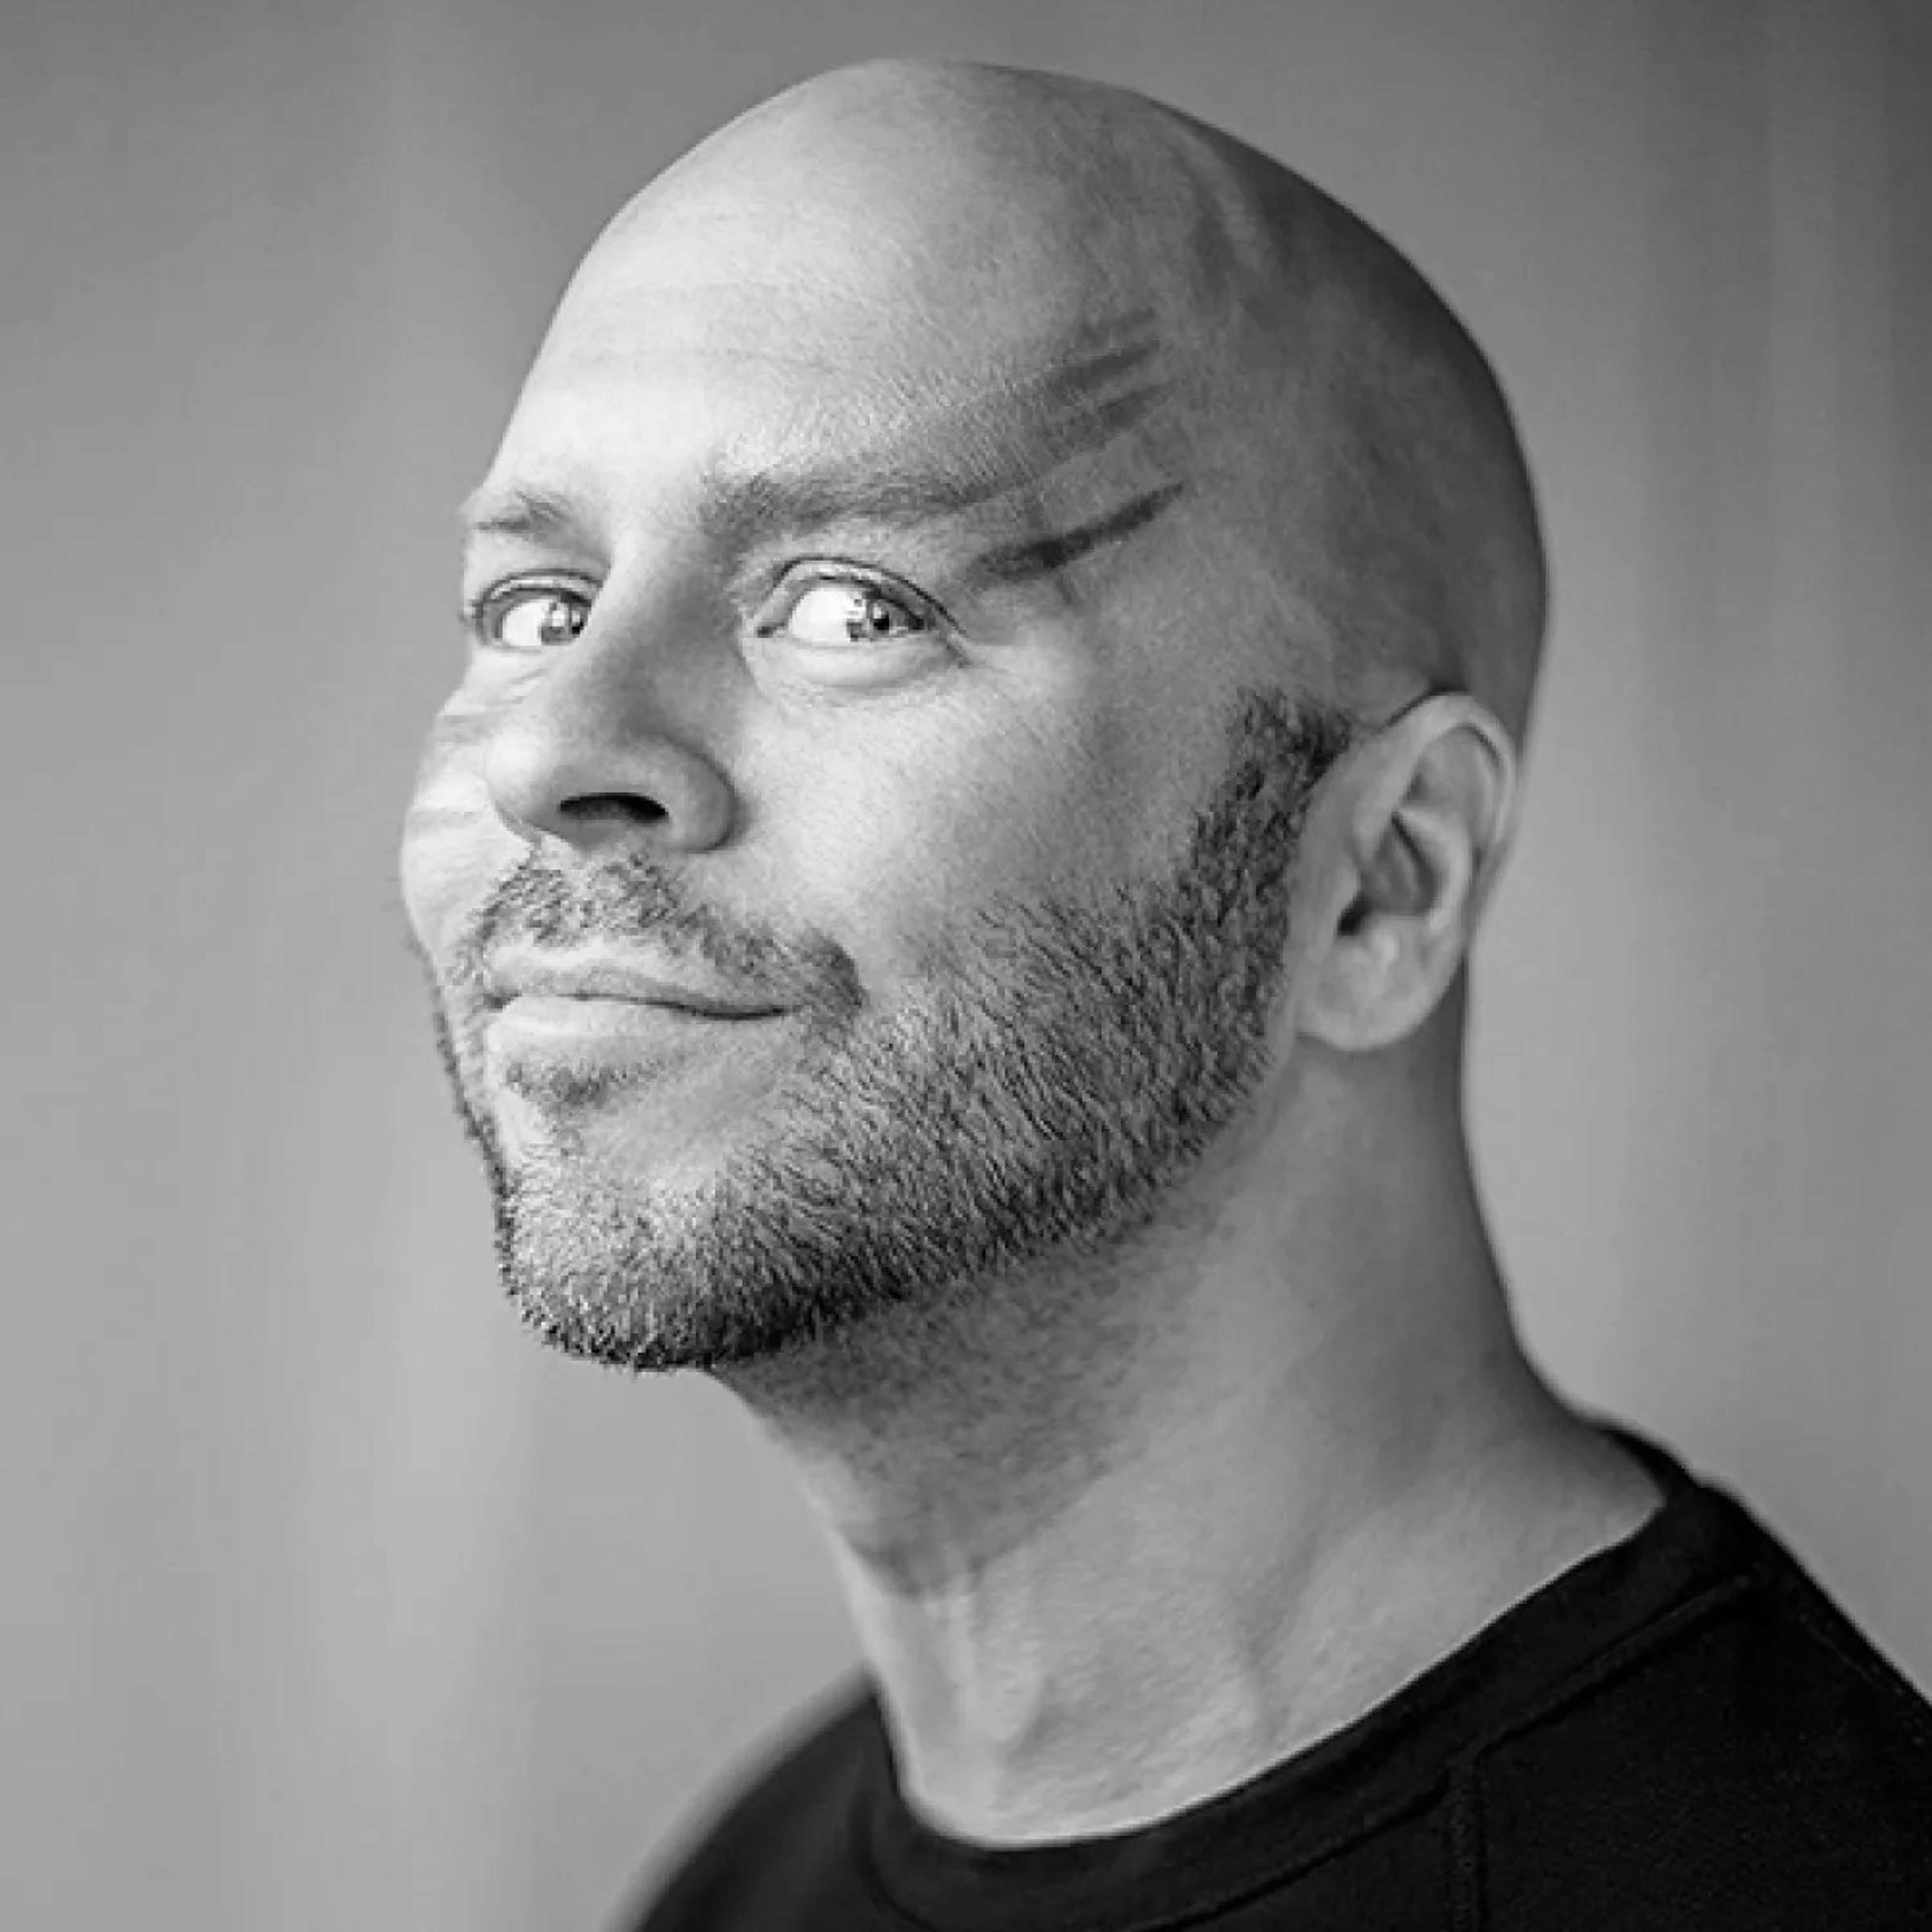 Derek Sivers on How to Negotiate Anything, The Joys of Parenthood & Why Nothing You Believe is True